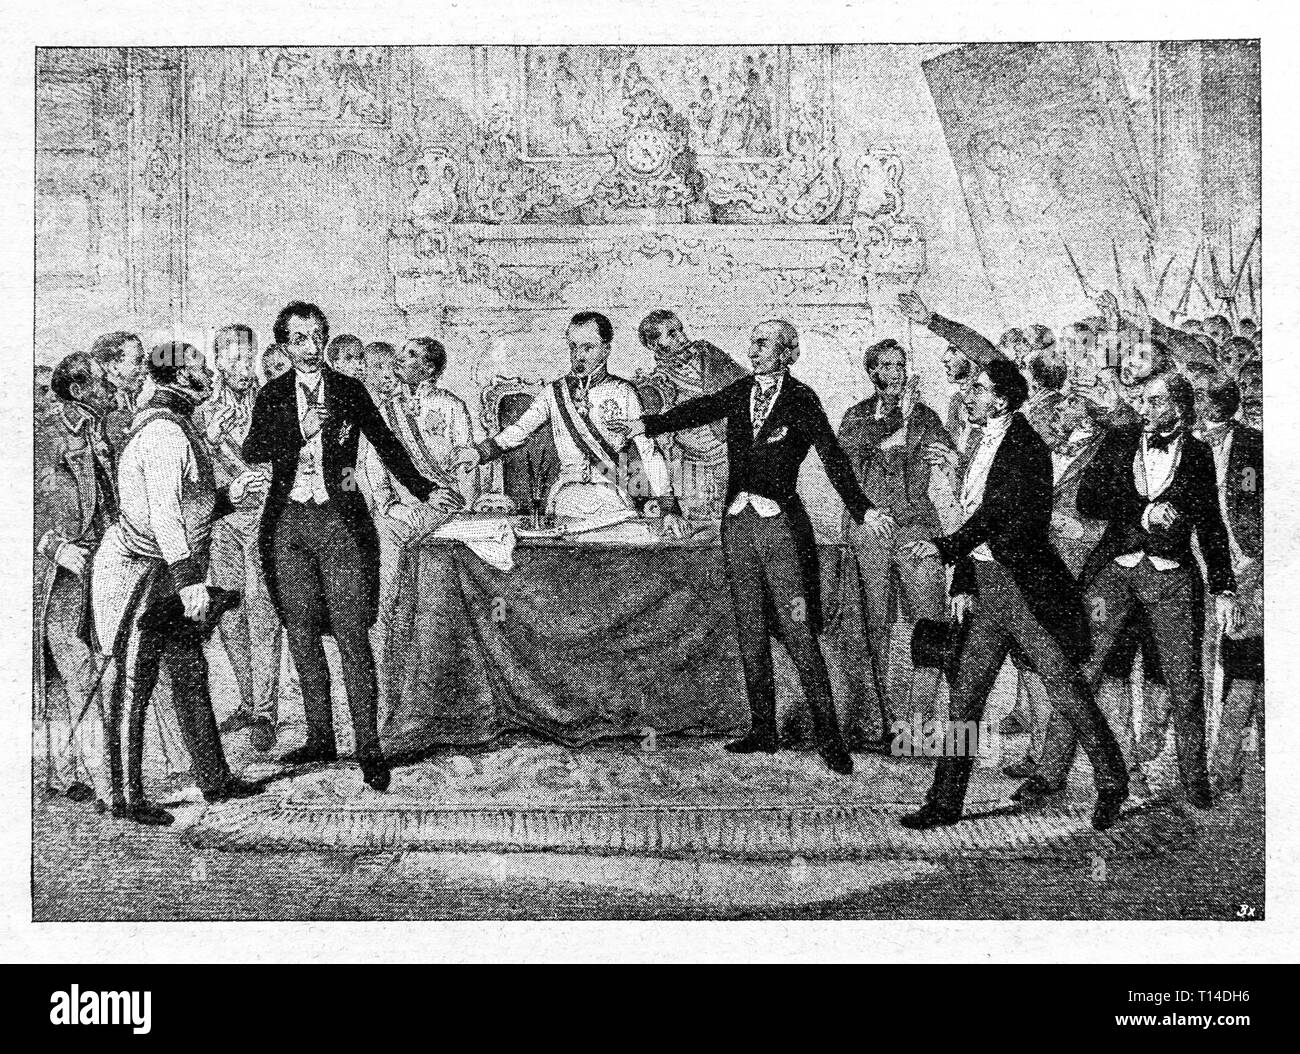 The dismissal of Prince Metternich on March 13; 1848. From lithography. Digital improved reproduction from Illustrated overview of the life of mankind in the 19th century, 1901 edition, Marx publishing house, St. Petersburg. Stock Photo